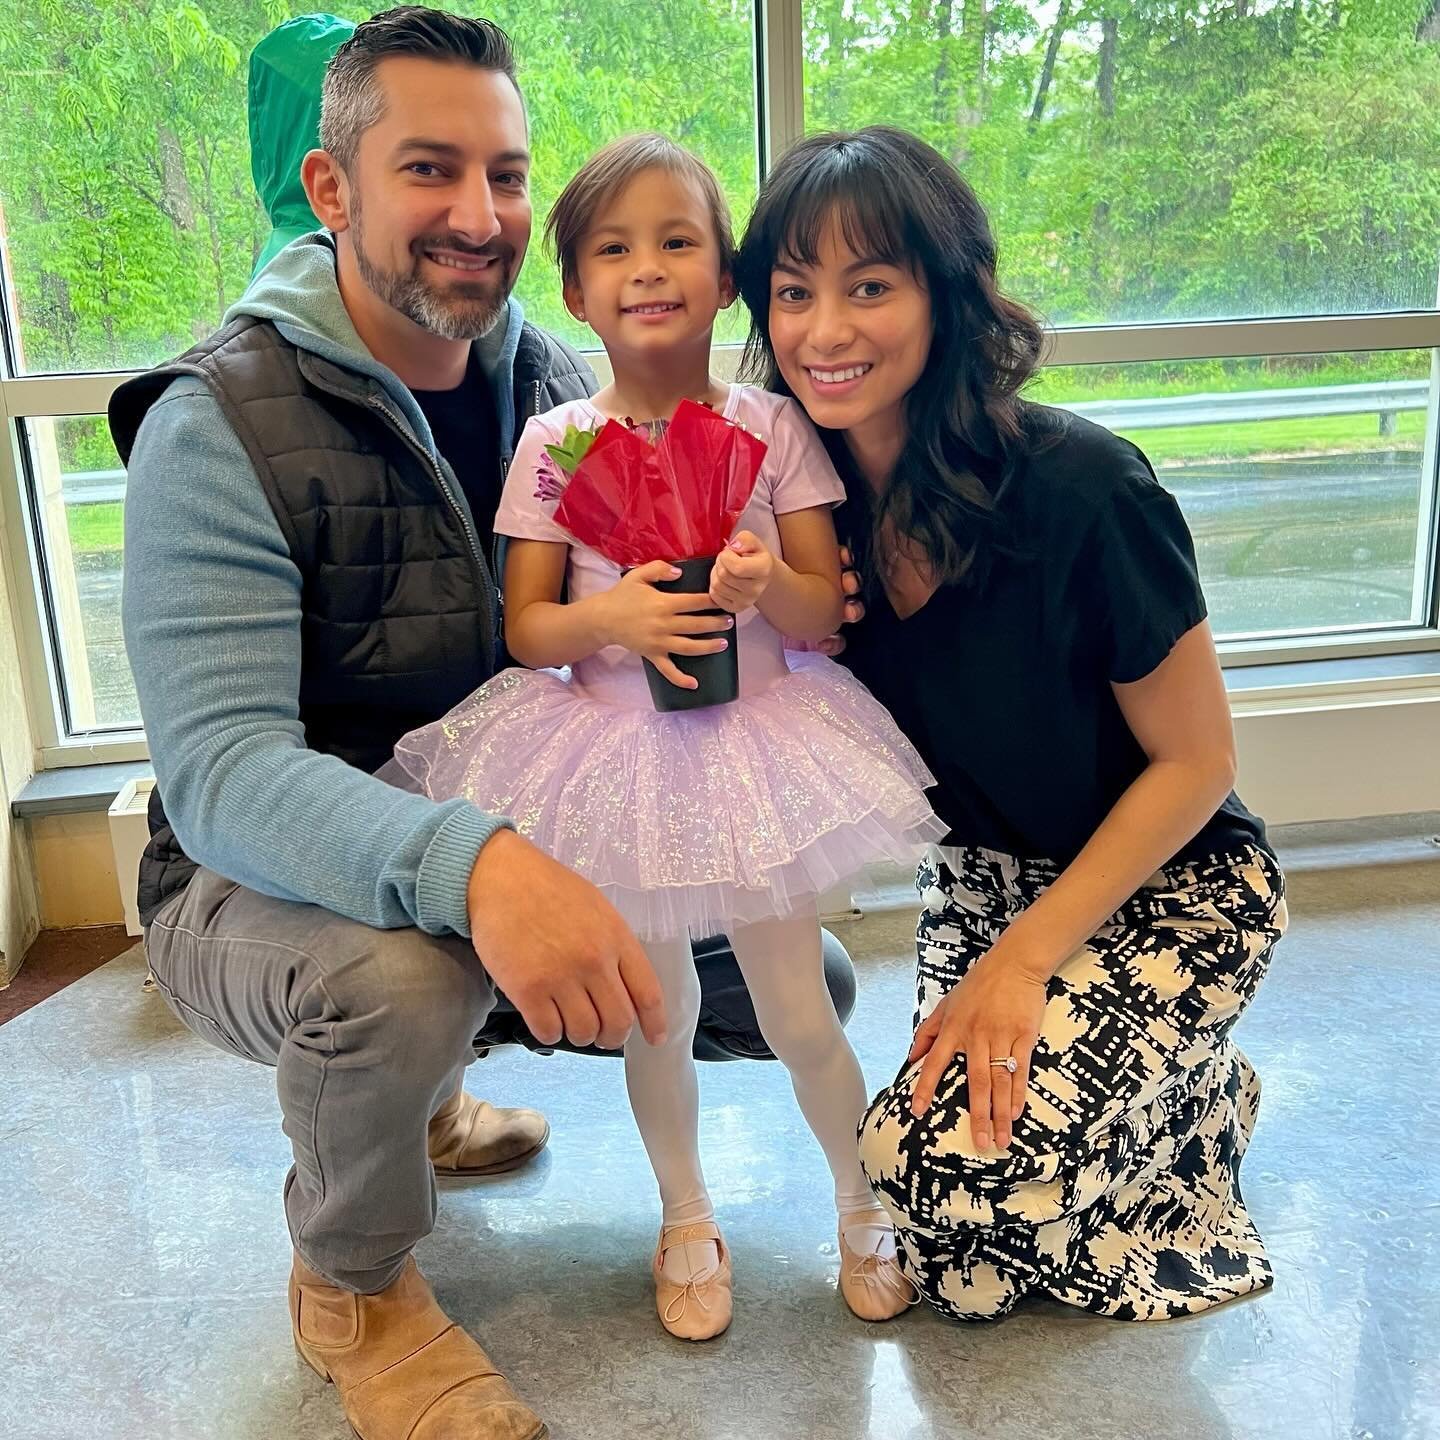 Making people smile in the office is Dr. Santos&rsquo; specialty&hellip; then she goes home and her days are topped off with seeing her kiddos smile. The best jobs in the world, and she is rockin&rsquo; both. 🥰 👧🏻👦🏻👦🏻 #momlife #dentistlife 

H